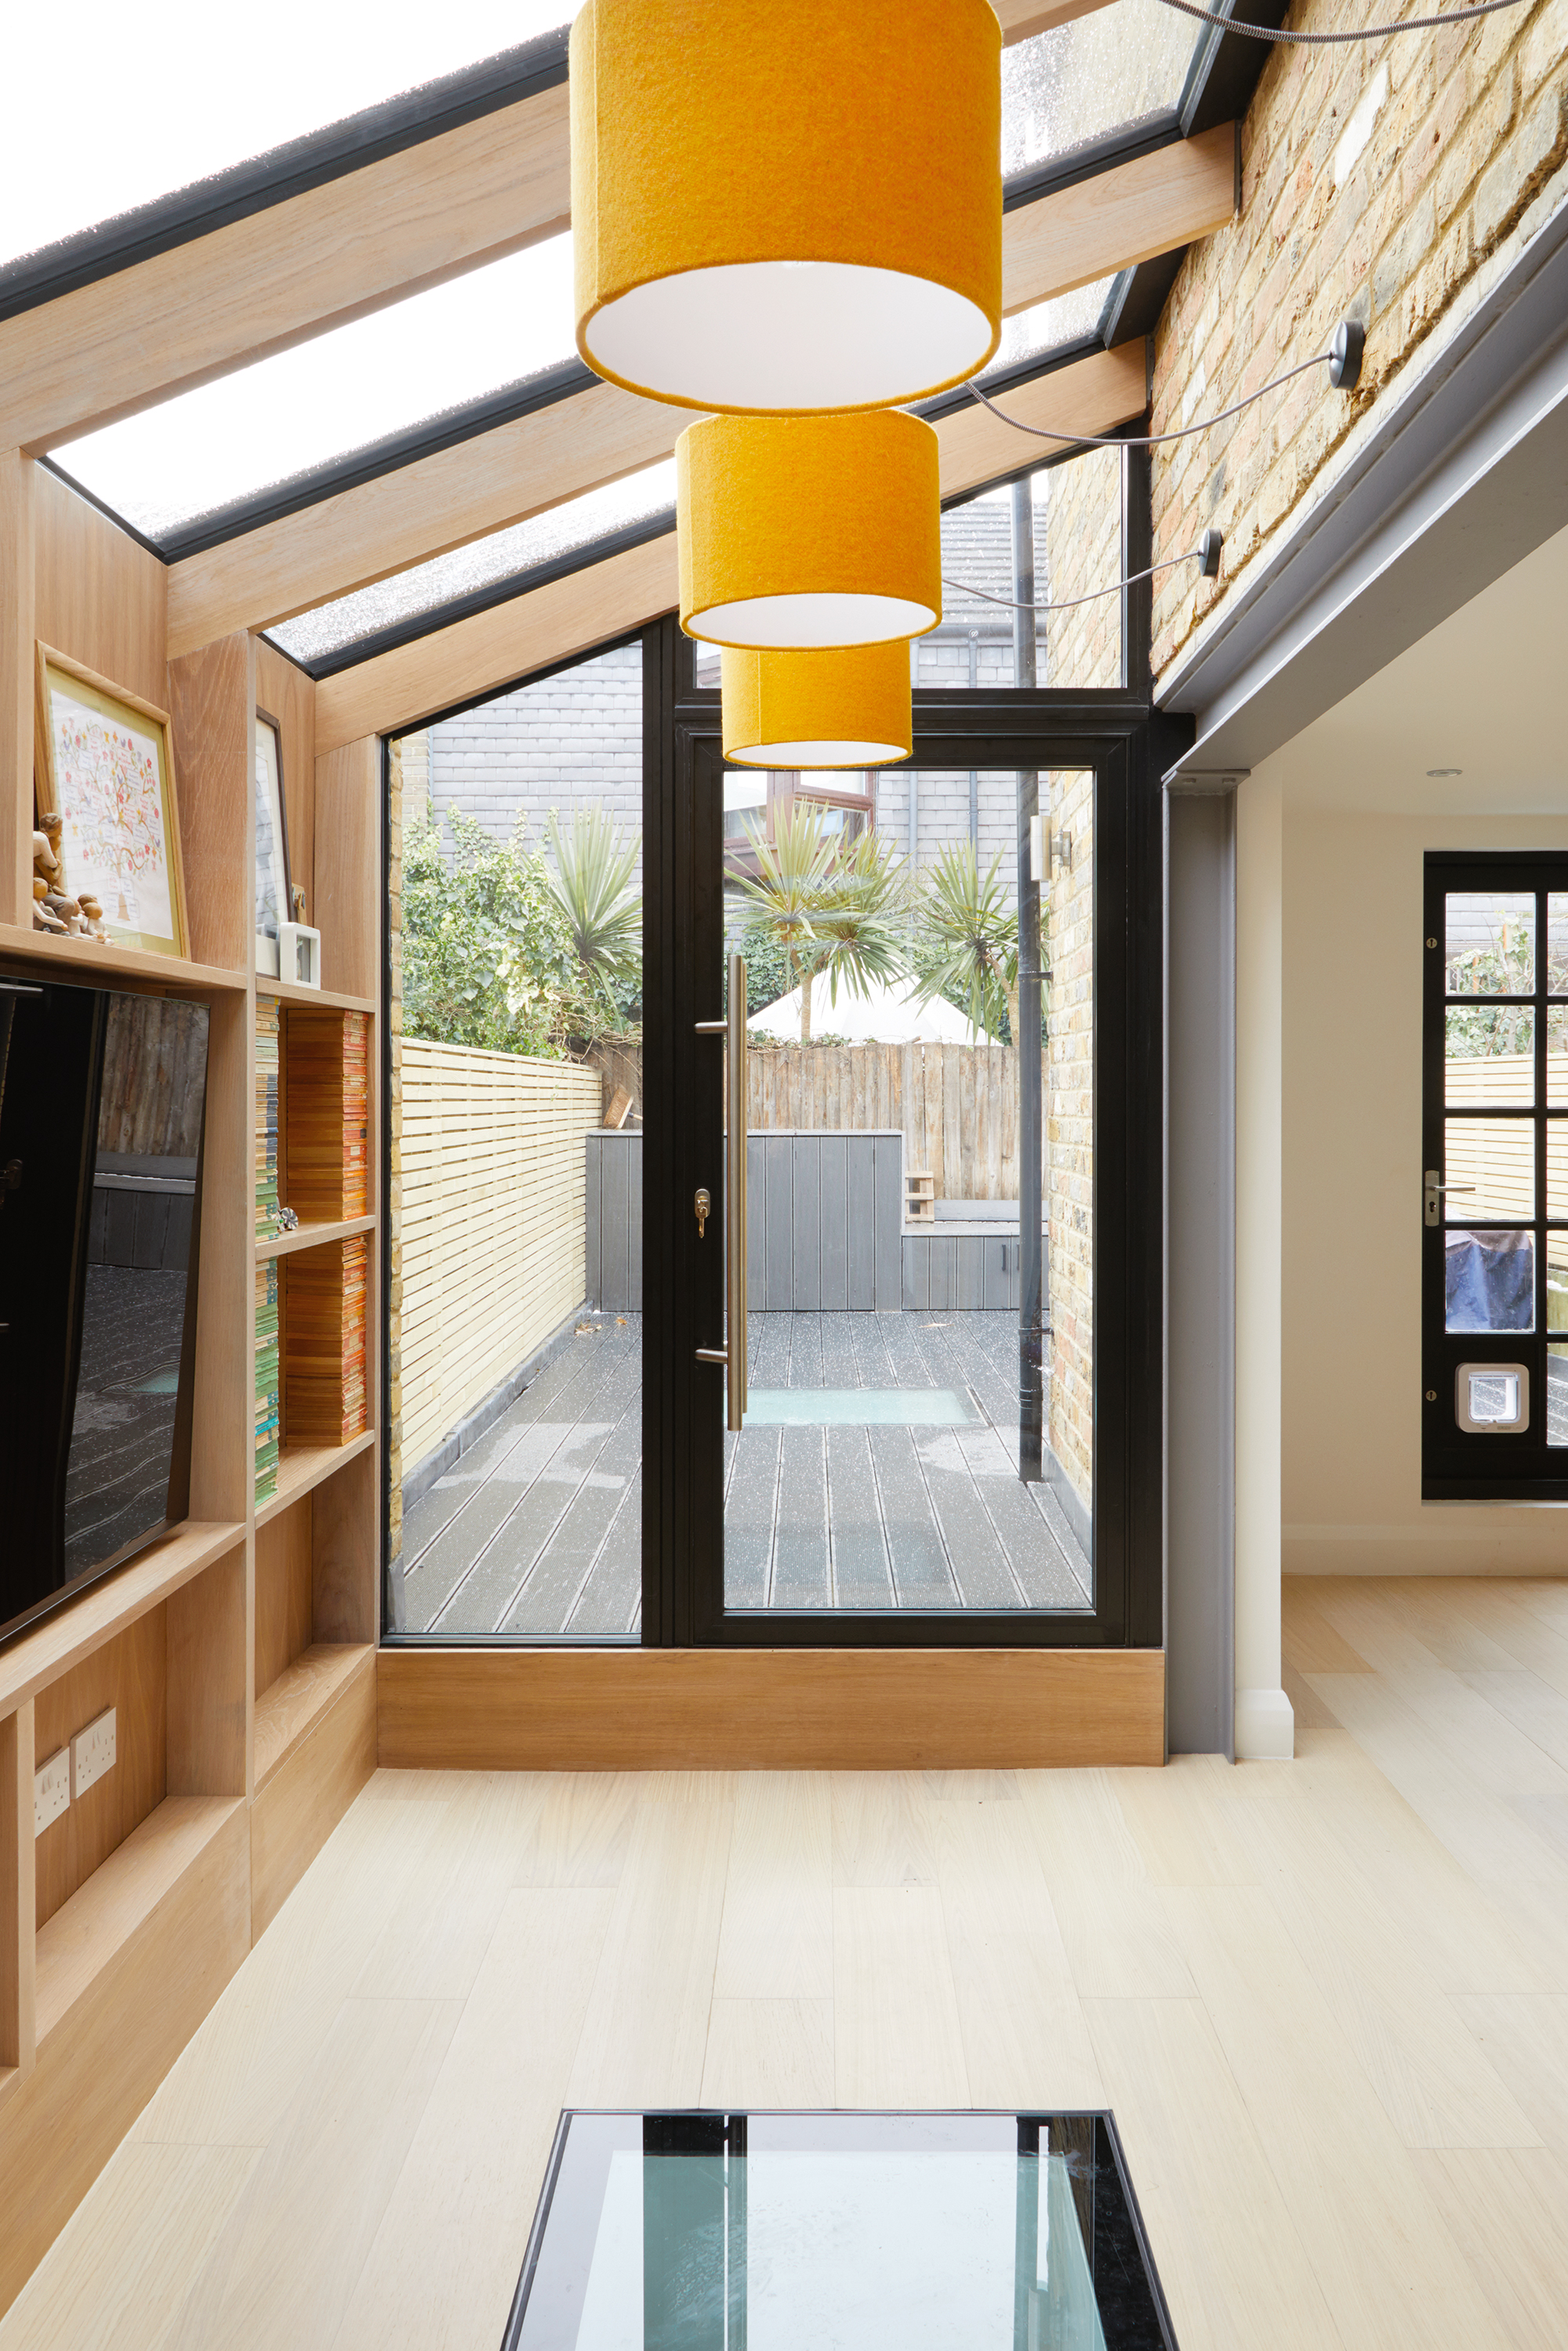 Timber frame extension with extensive glazing as seen from inside